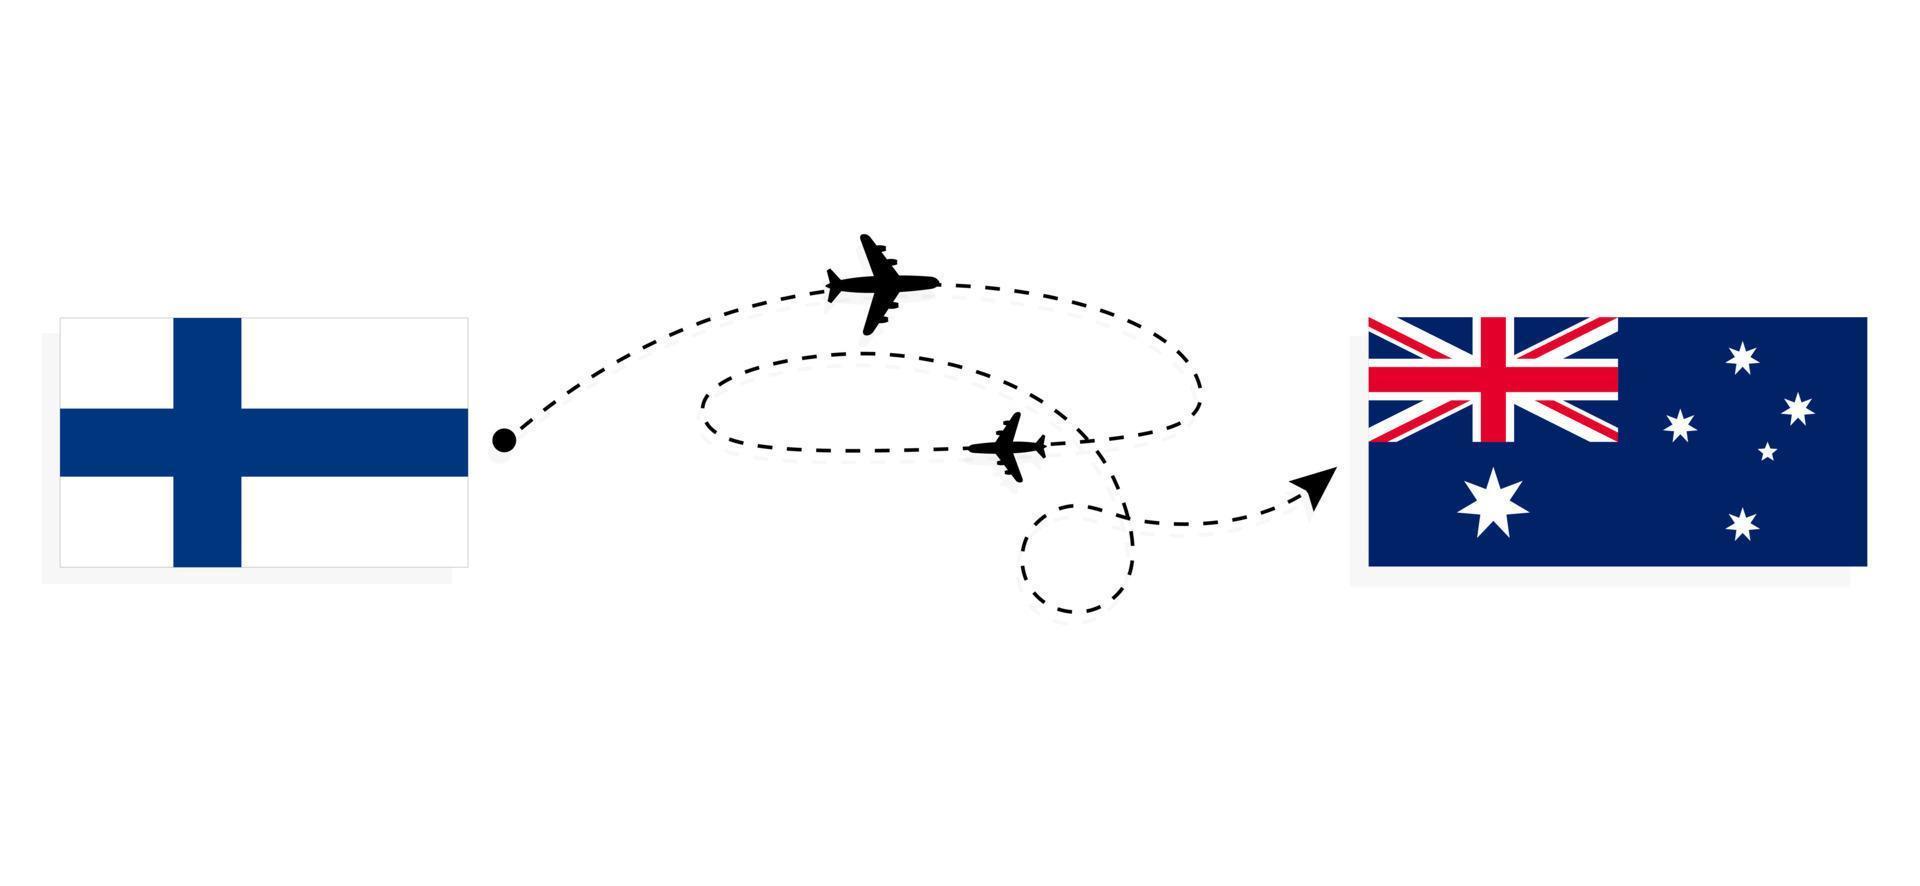 Flight and travel from Finland to Australia by passenger airplane Travel concept vector